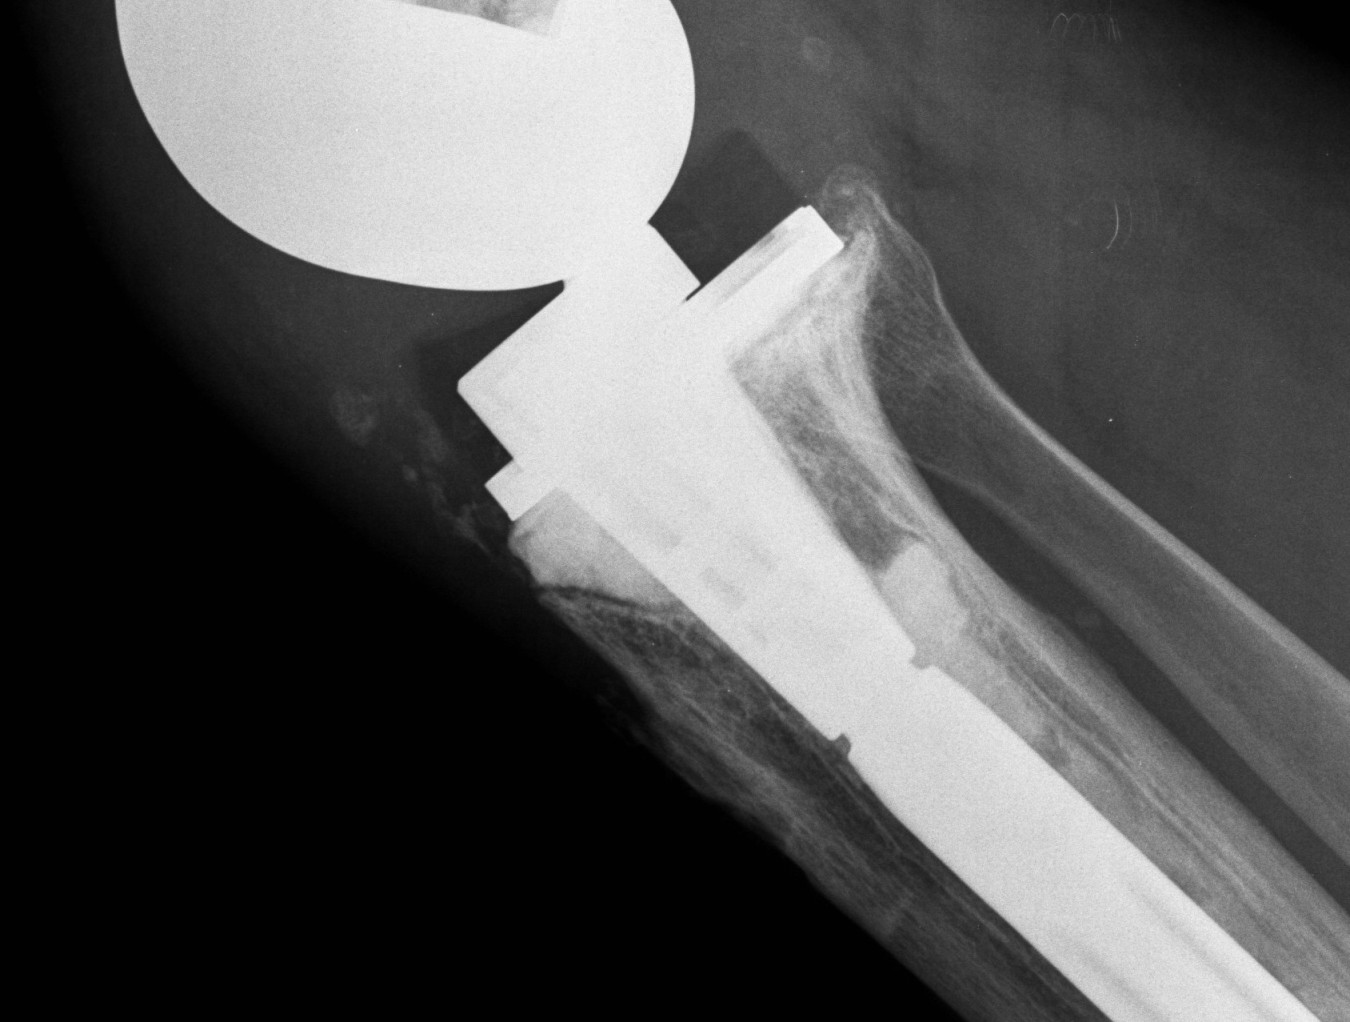 Revision TKR Bone Defect Cement Lateral.jpg